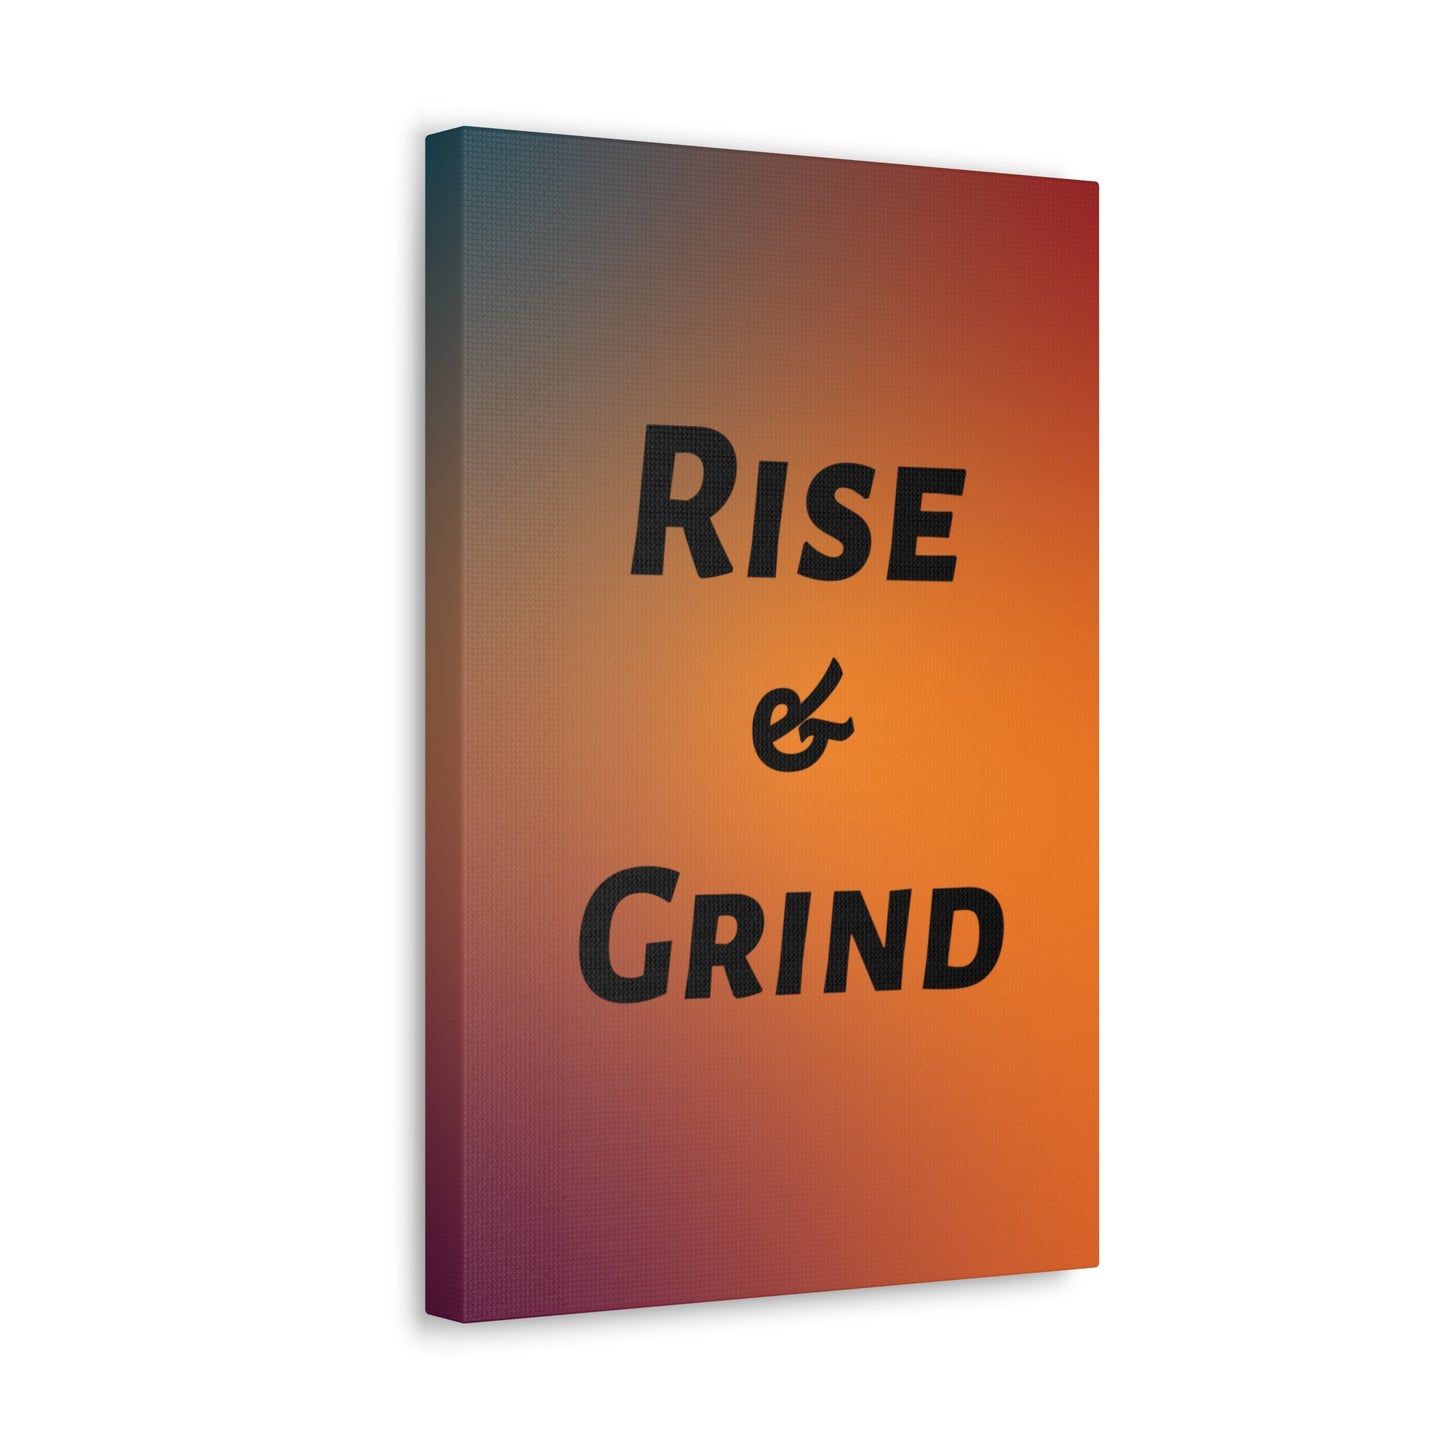 Empowering rise and grind artwork for personal growth